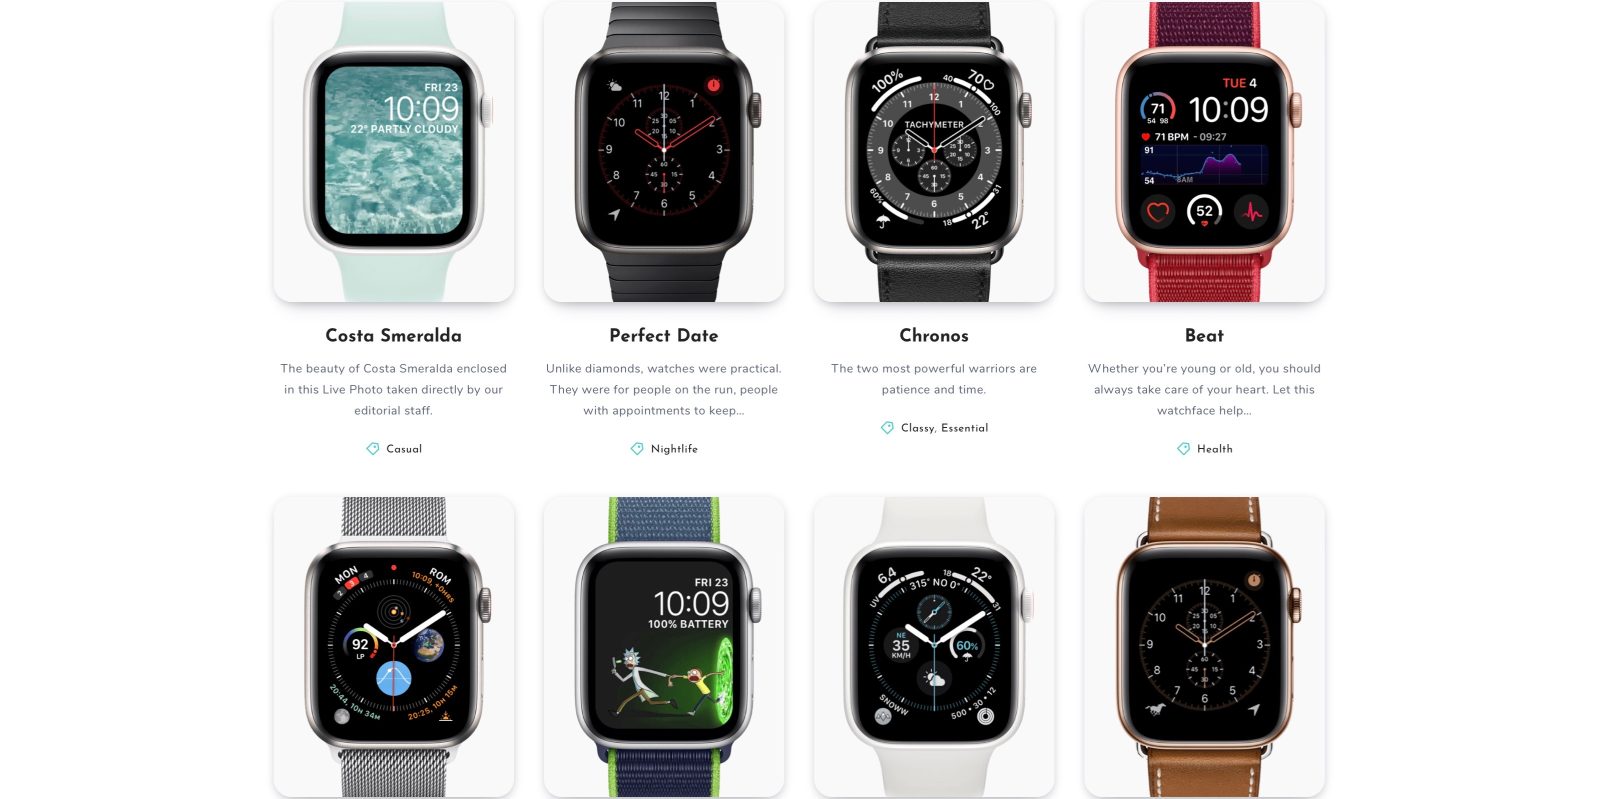 Discover and download Apple Watch faces